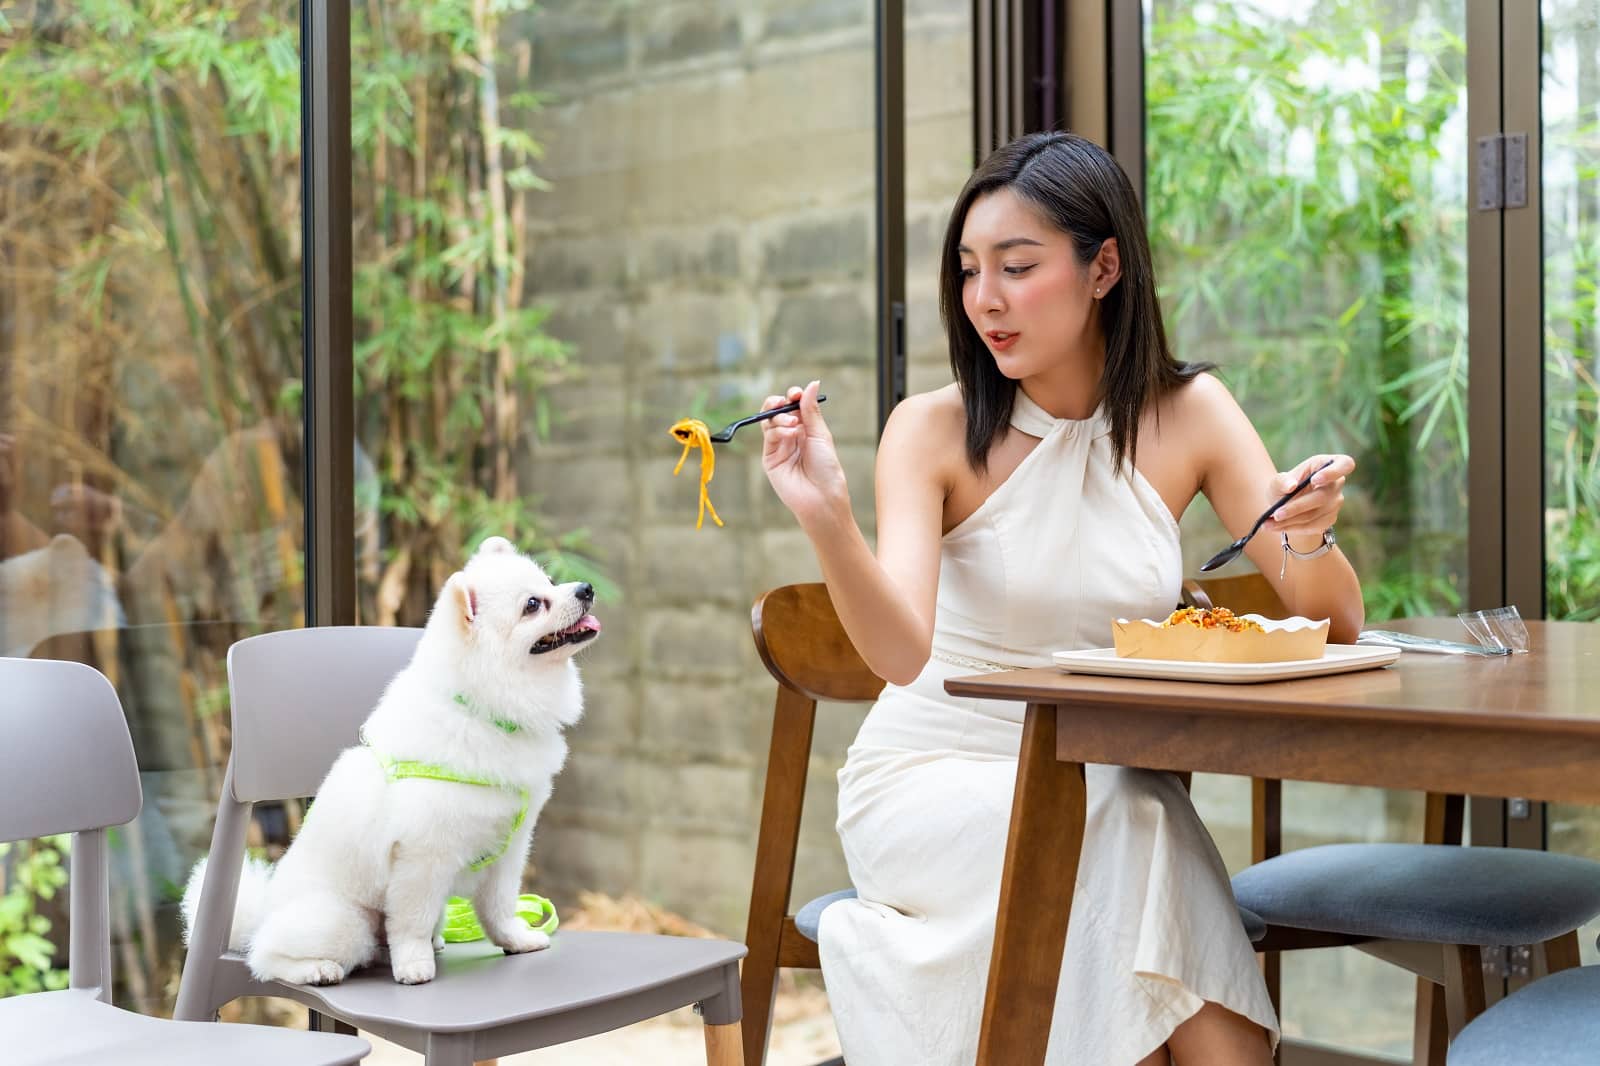 <p><span>Dining out with your pet can be a delightful experience if you find the right spots. Many cities have restaurants, cafes, and breweries that allow pets in outdoor seating areas. Some establishments may even offer special pet menus. Always call ahead to confirm pet policies and the availability of pet-friendly seating.</span></p> <p><b>Insider’s Tip: </b><span>Look for restaurants with spacious outdoor patios that are more likely to accommodate pets comfortably.</span></p>